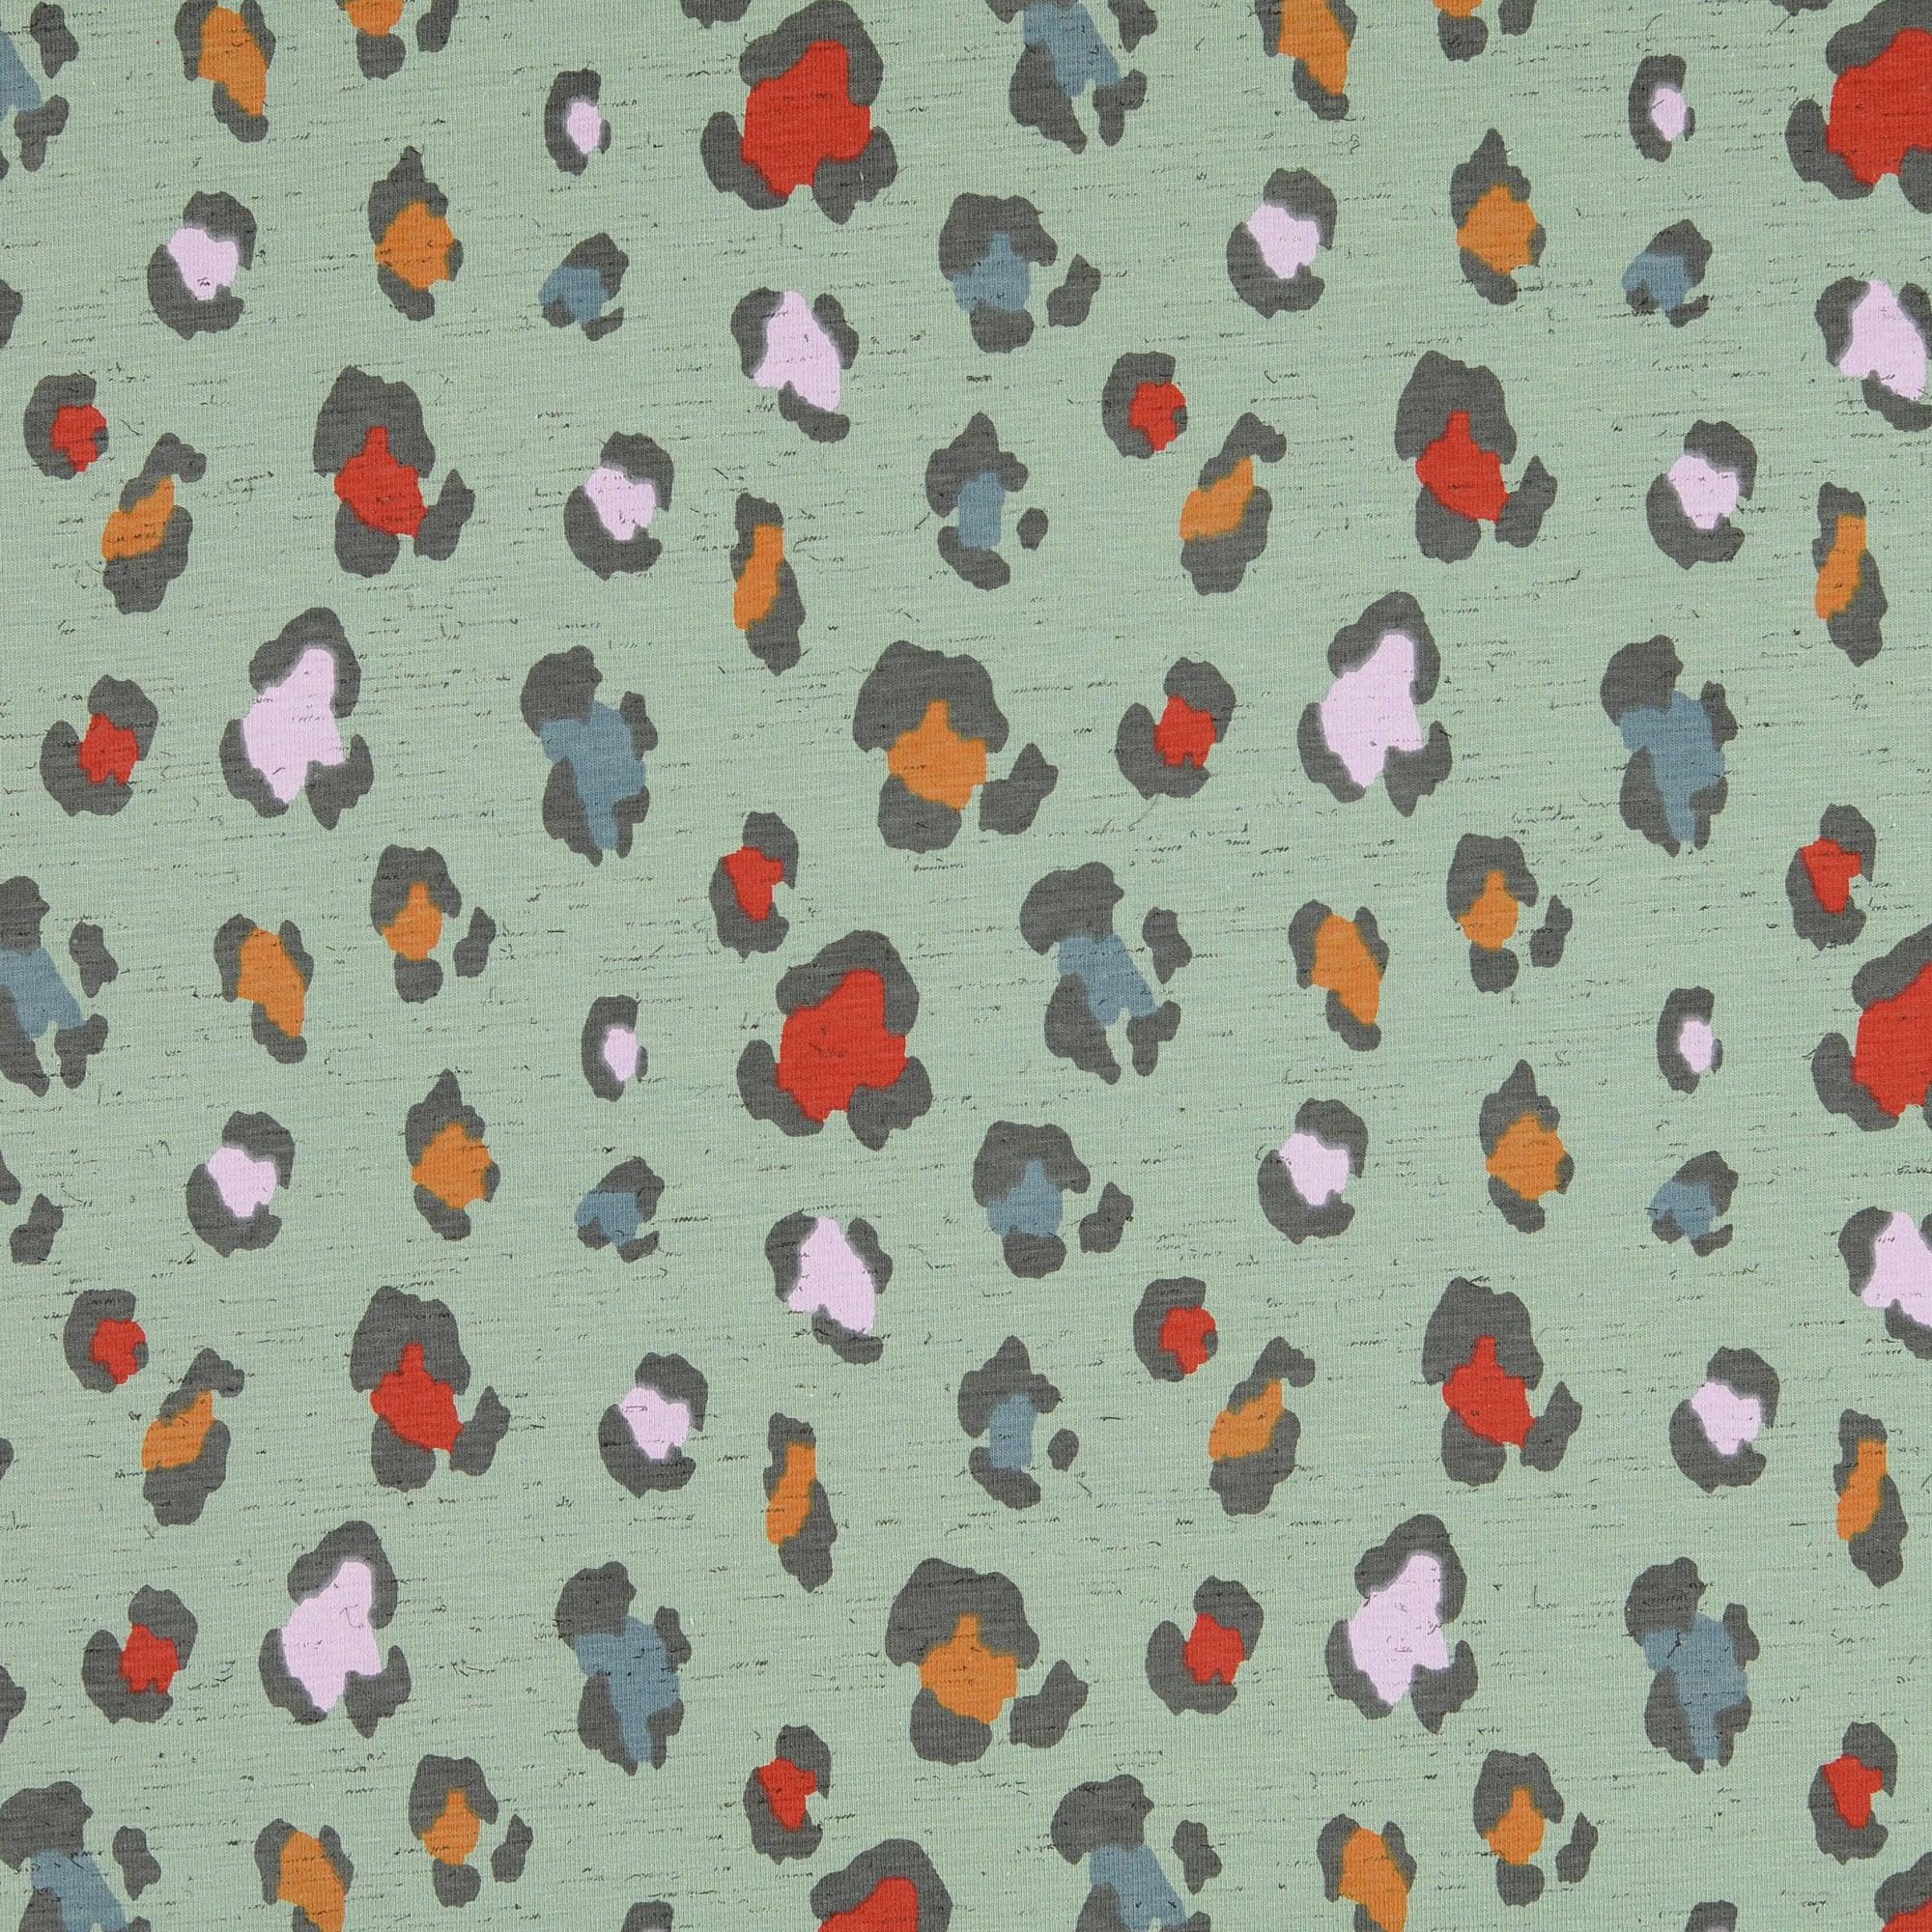 Leopard in Green Cotton Jersey Fabric